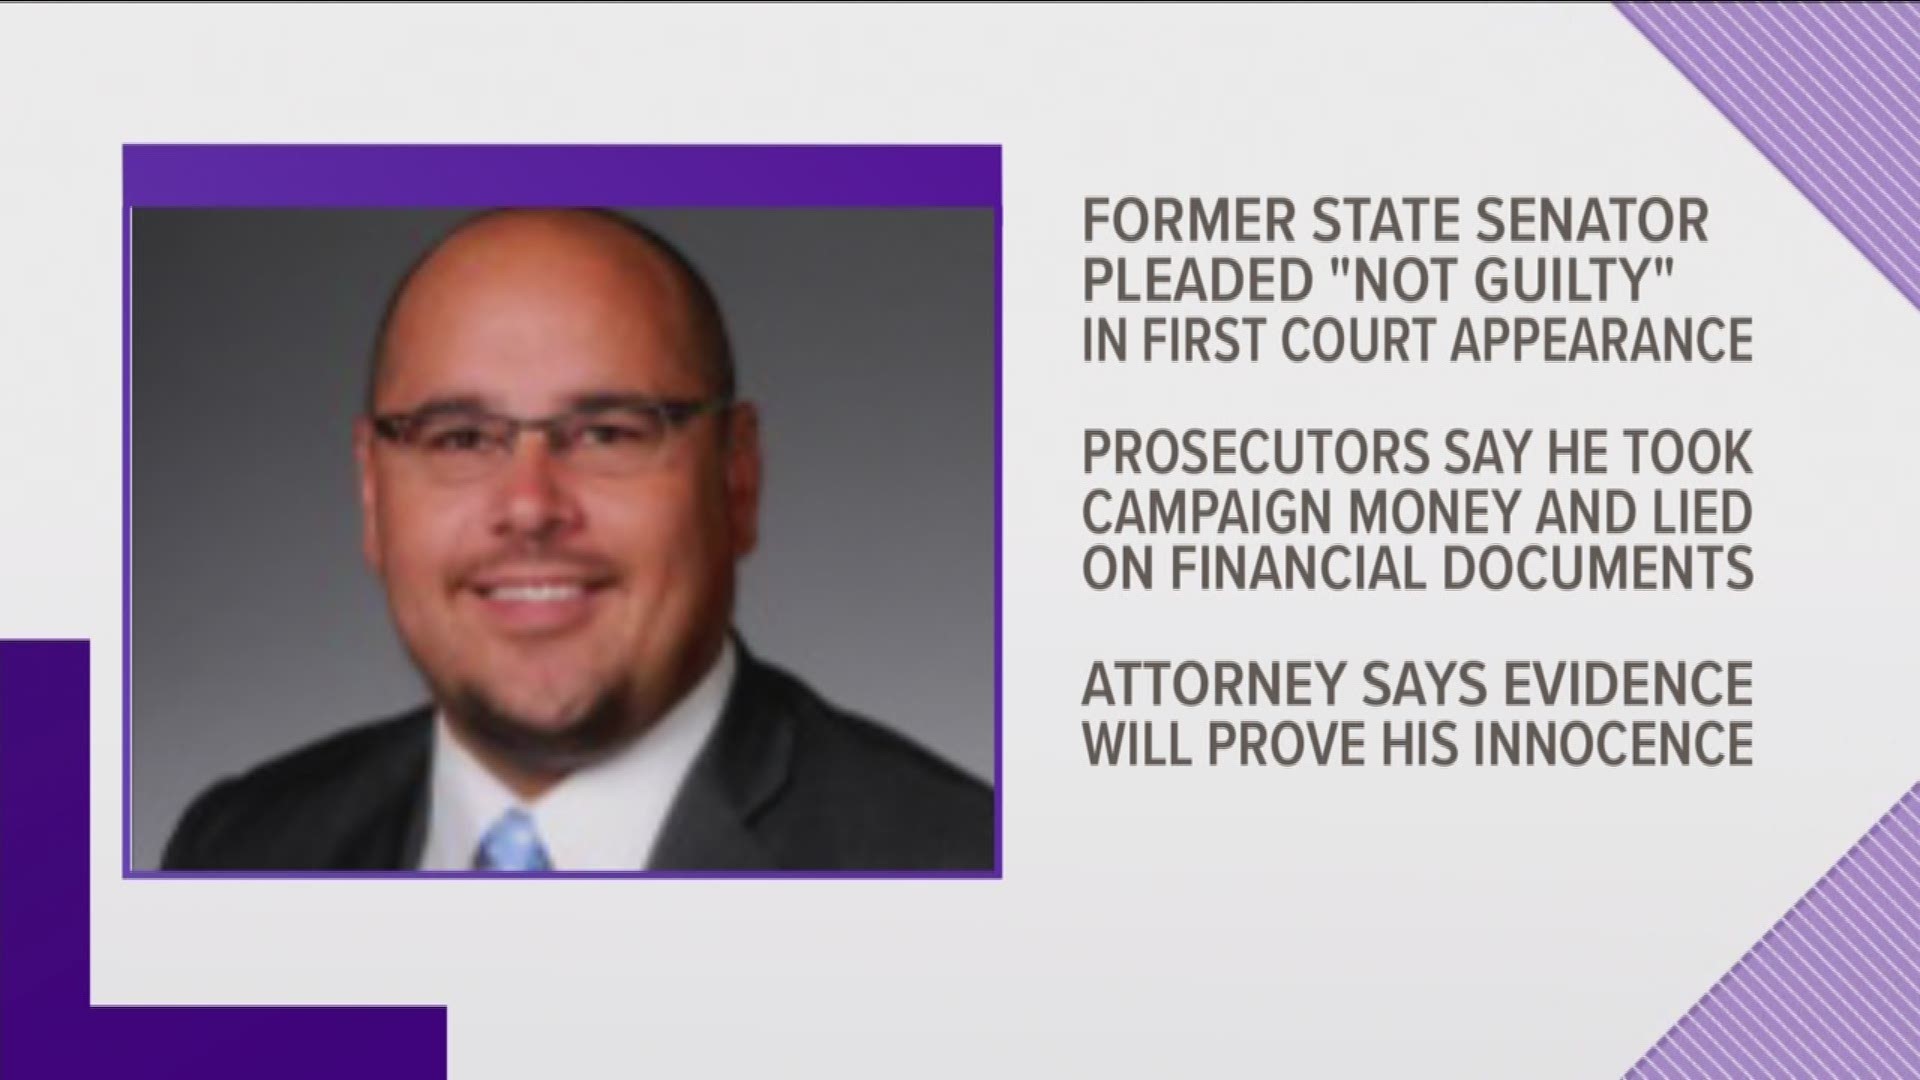 A former Arkansas lawmaker, nephew of Gov. Asa Hutchinson, has pleaded not guilty to federal charges that he spent thousands of dollars in campaign funds on trips, groceries and other personal expenses.